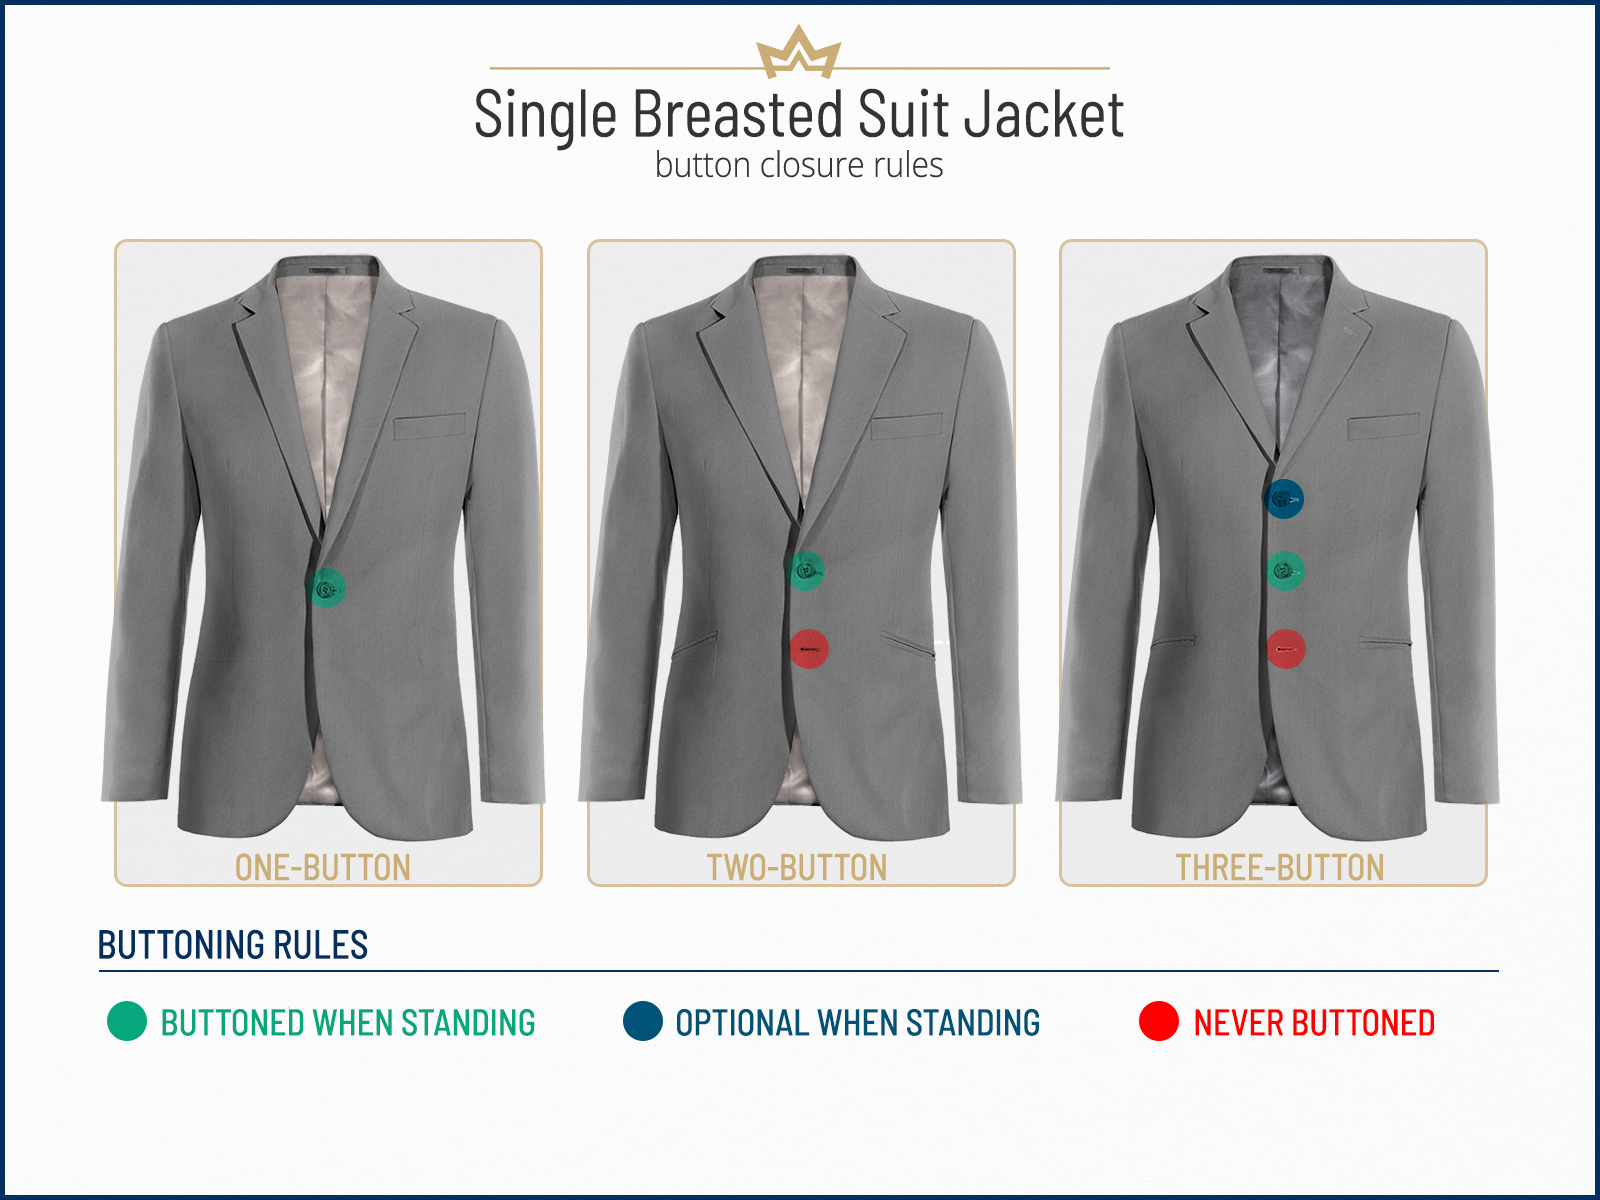 Single-breasted suit button closure rule